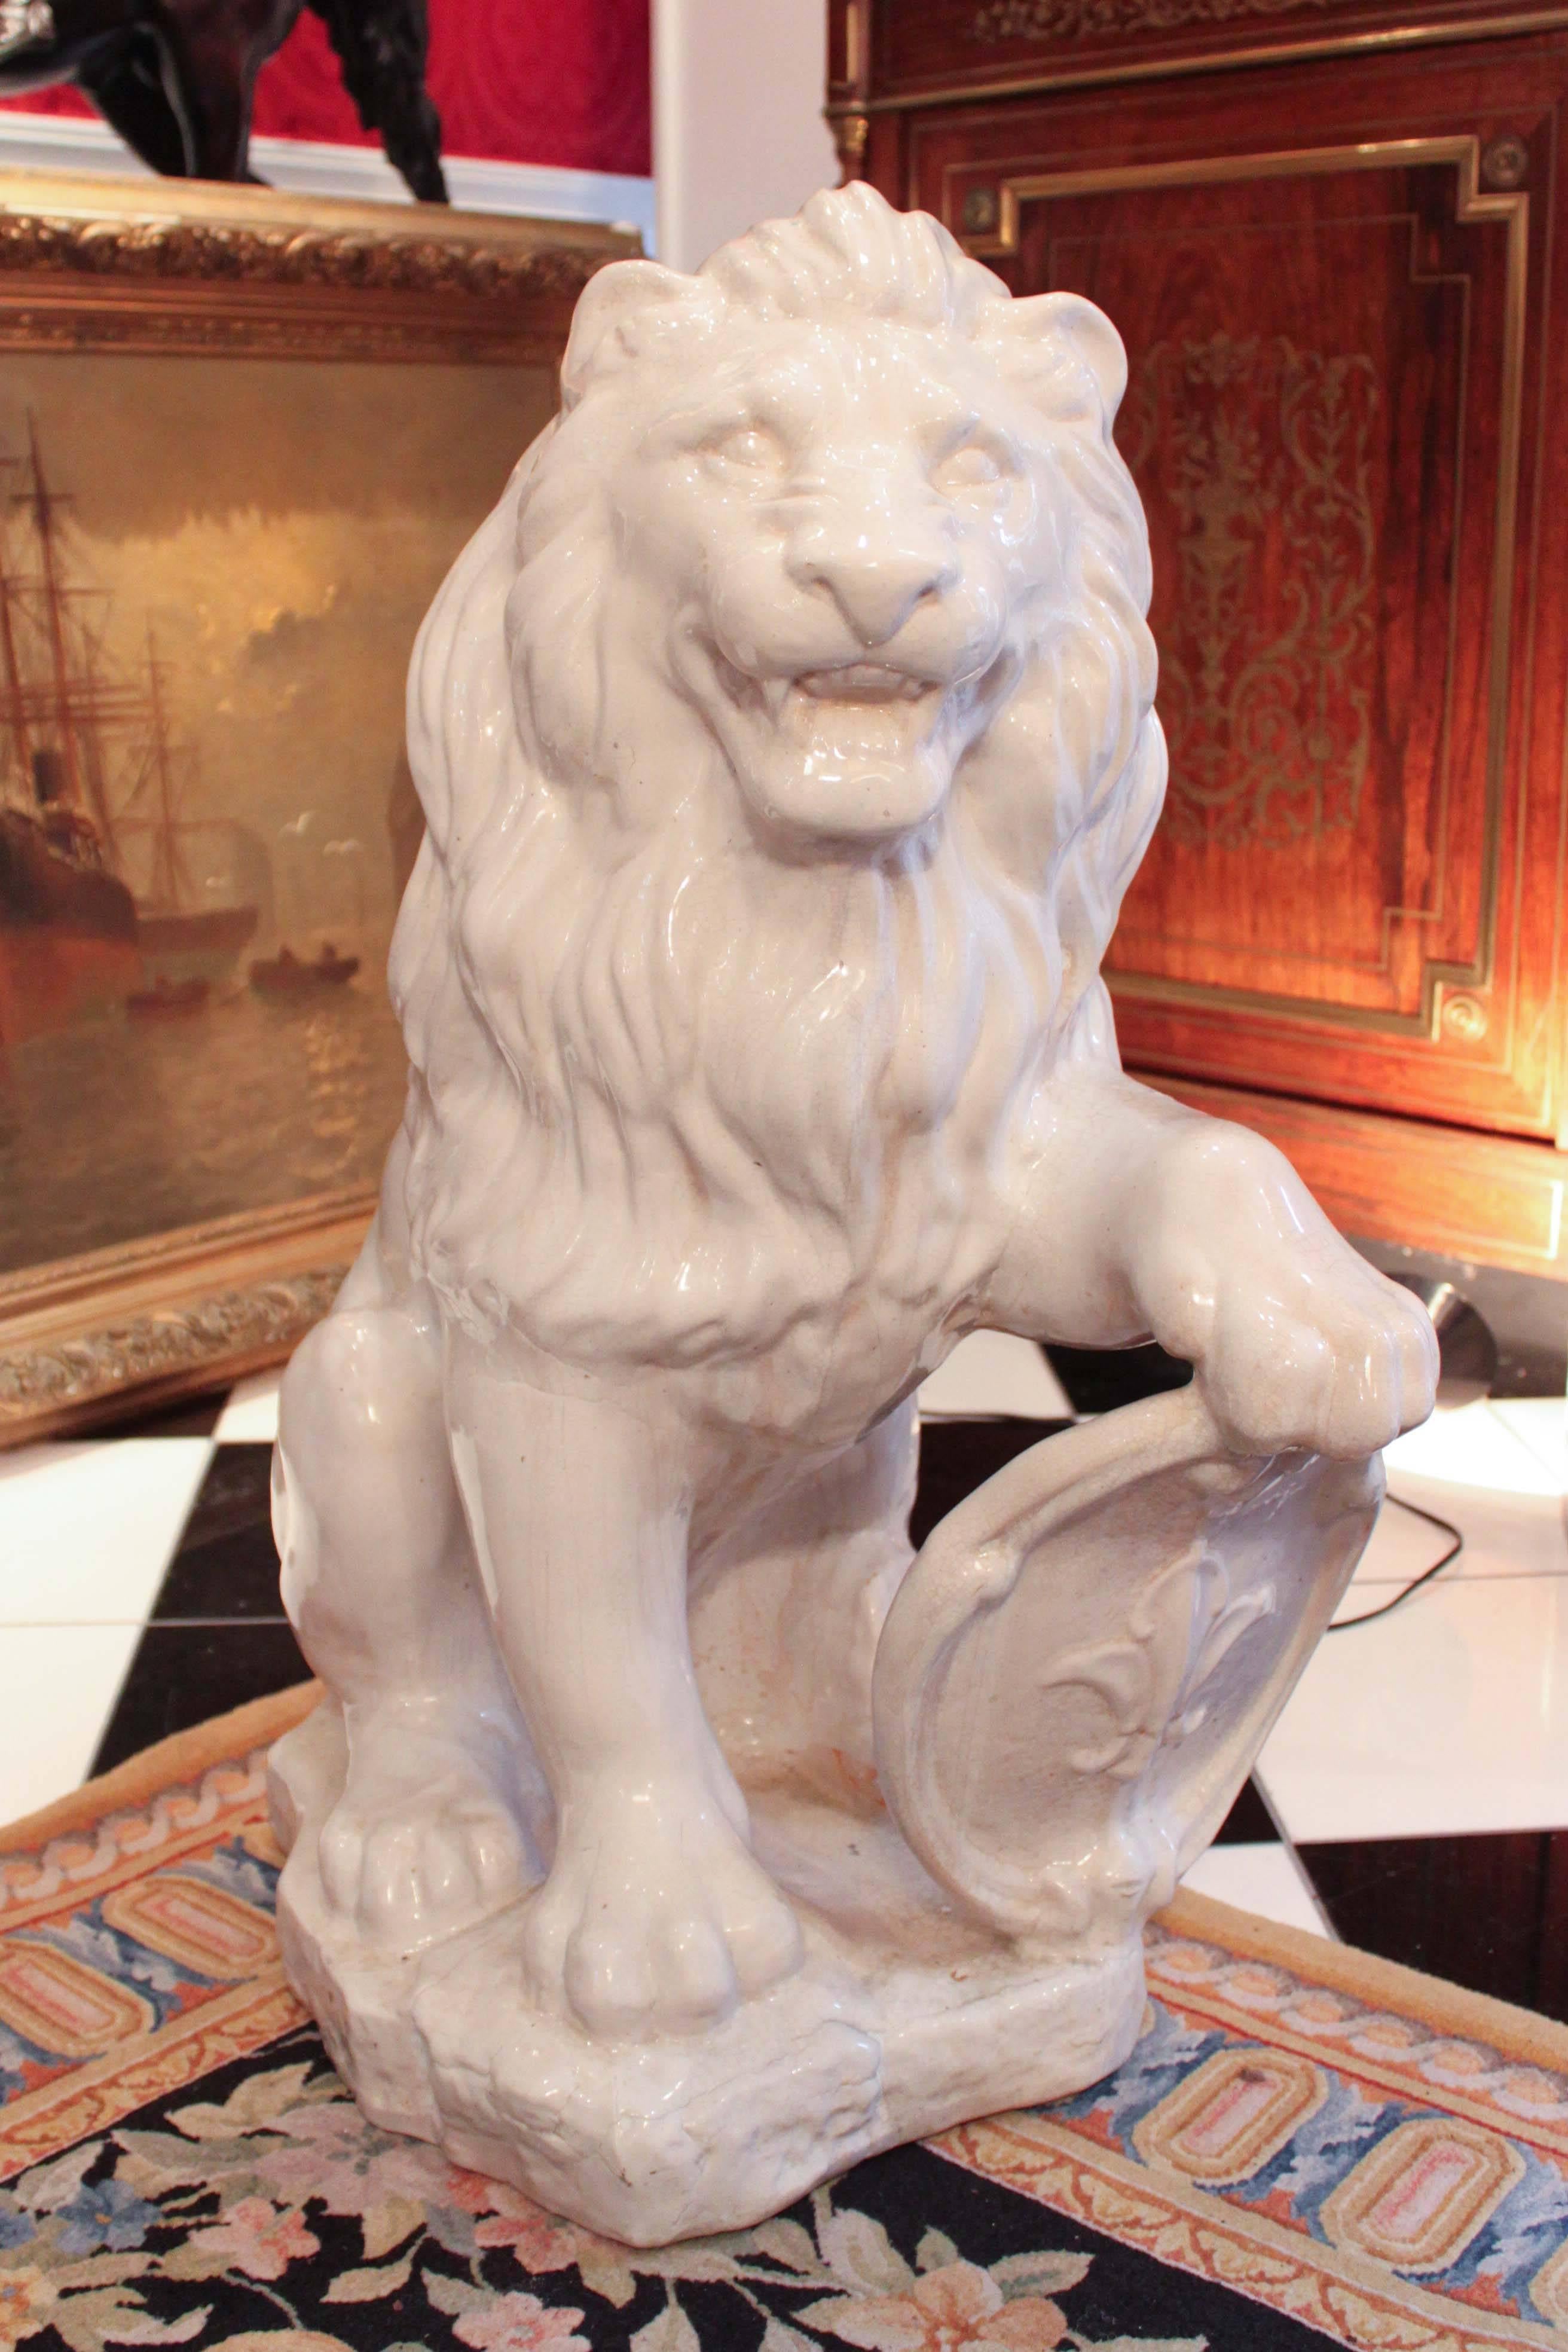 Pair of terra cotta lions in white, circa late 19th century. Great overall size and condition with minor hairline cracks typical for the age. Lions have an attentive and welcoming look on their face, with one paw on a shield with a fleur-de-lis